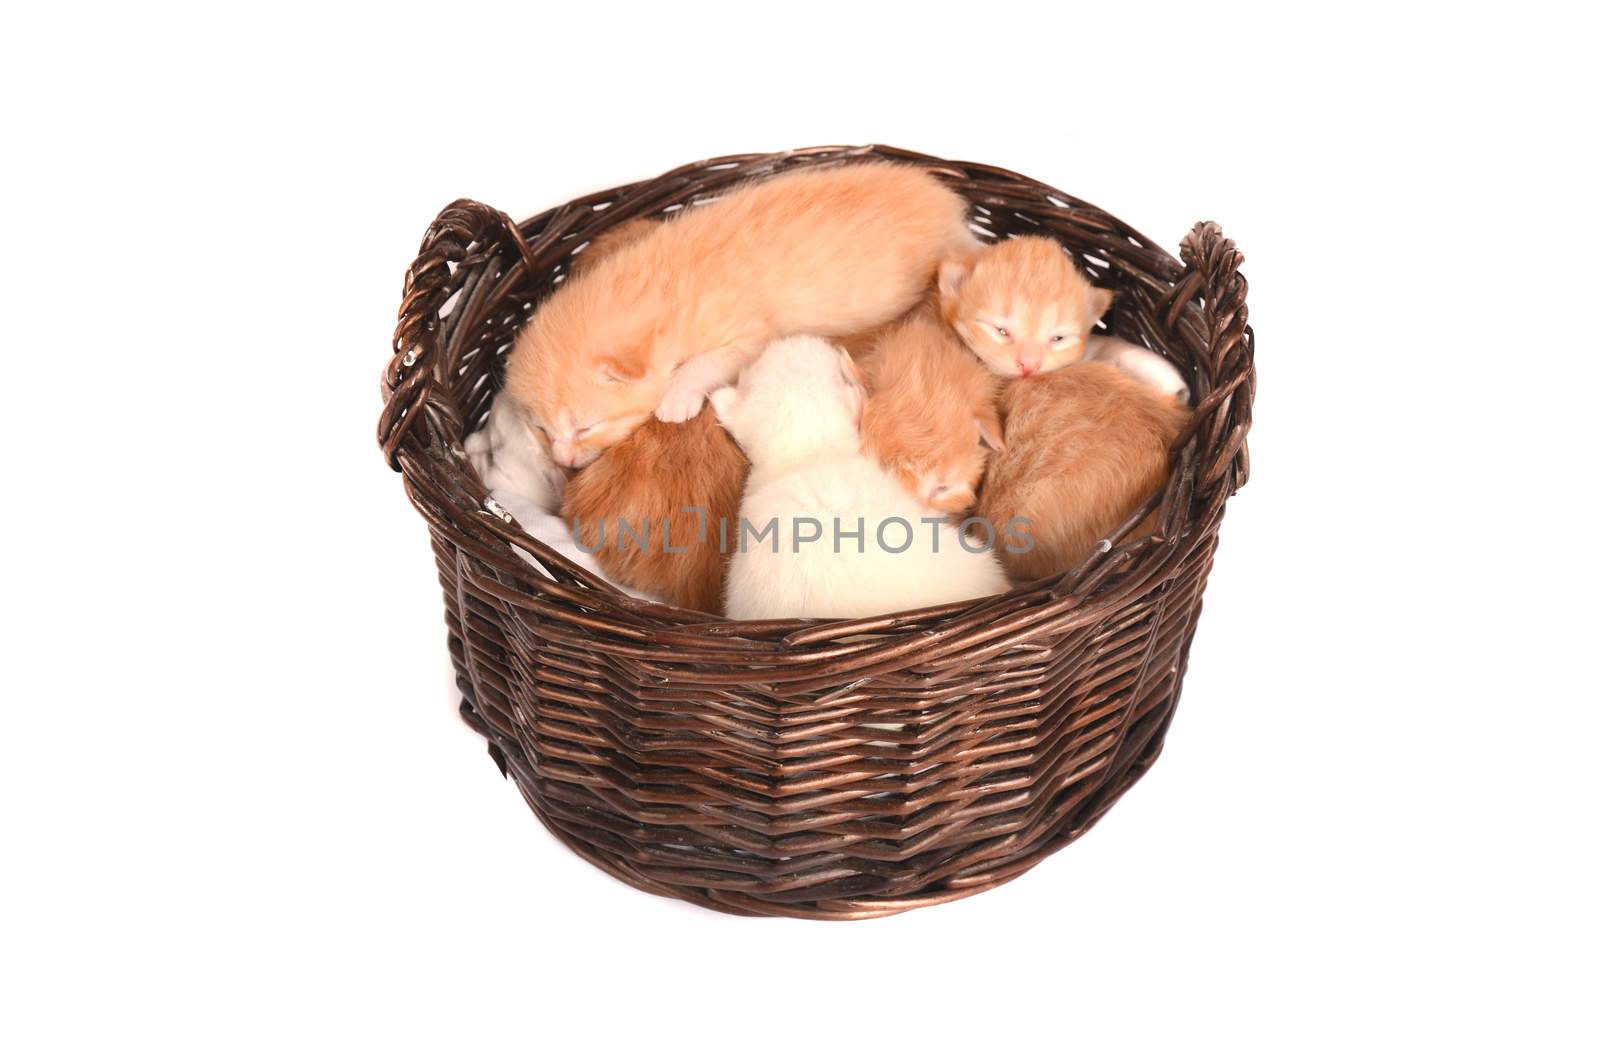 Newborn orange and white kittens in a basket. by dnsphotography